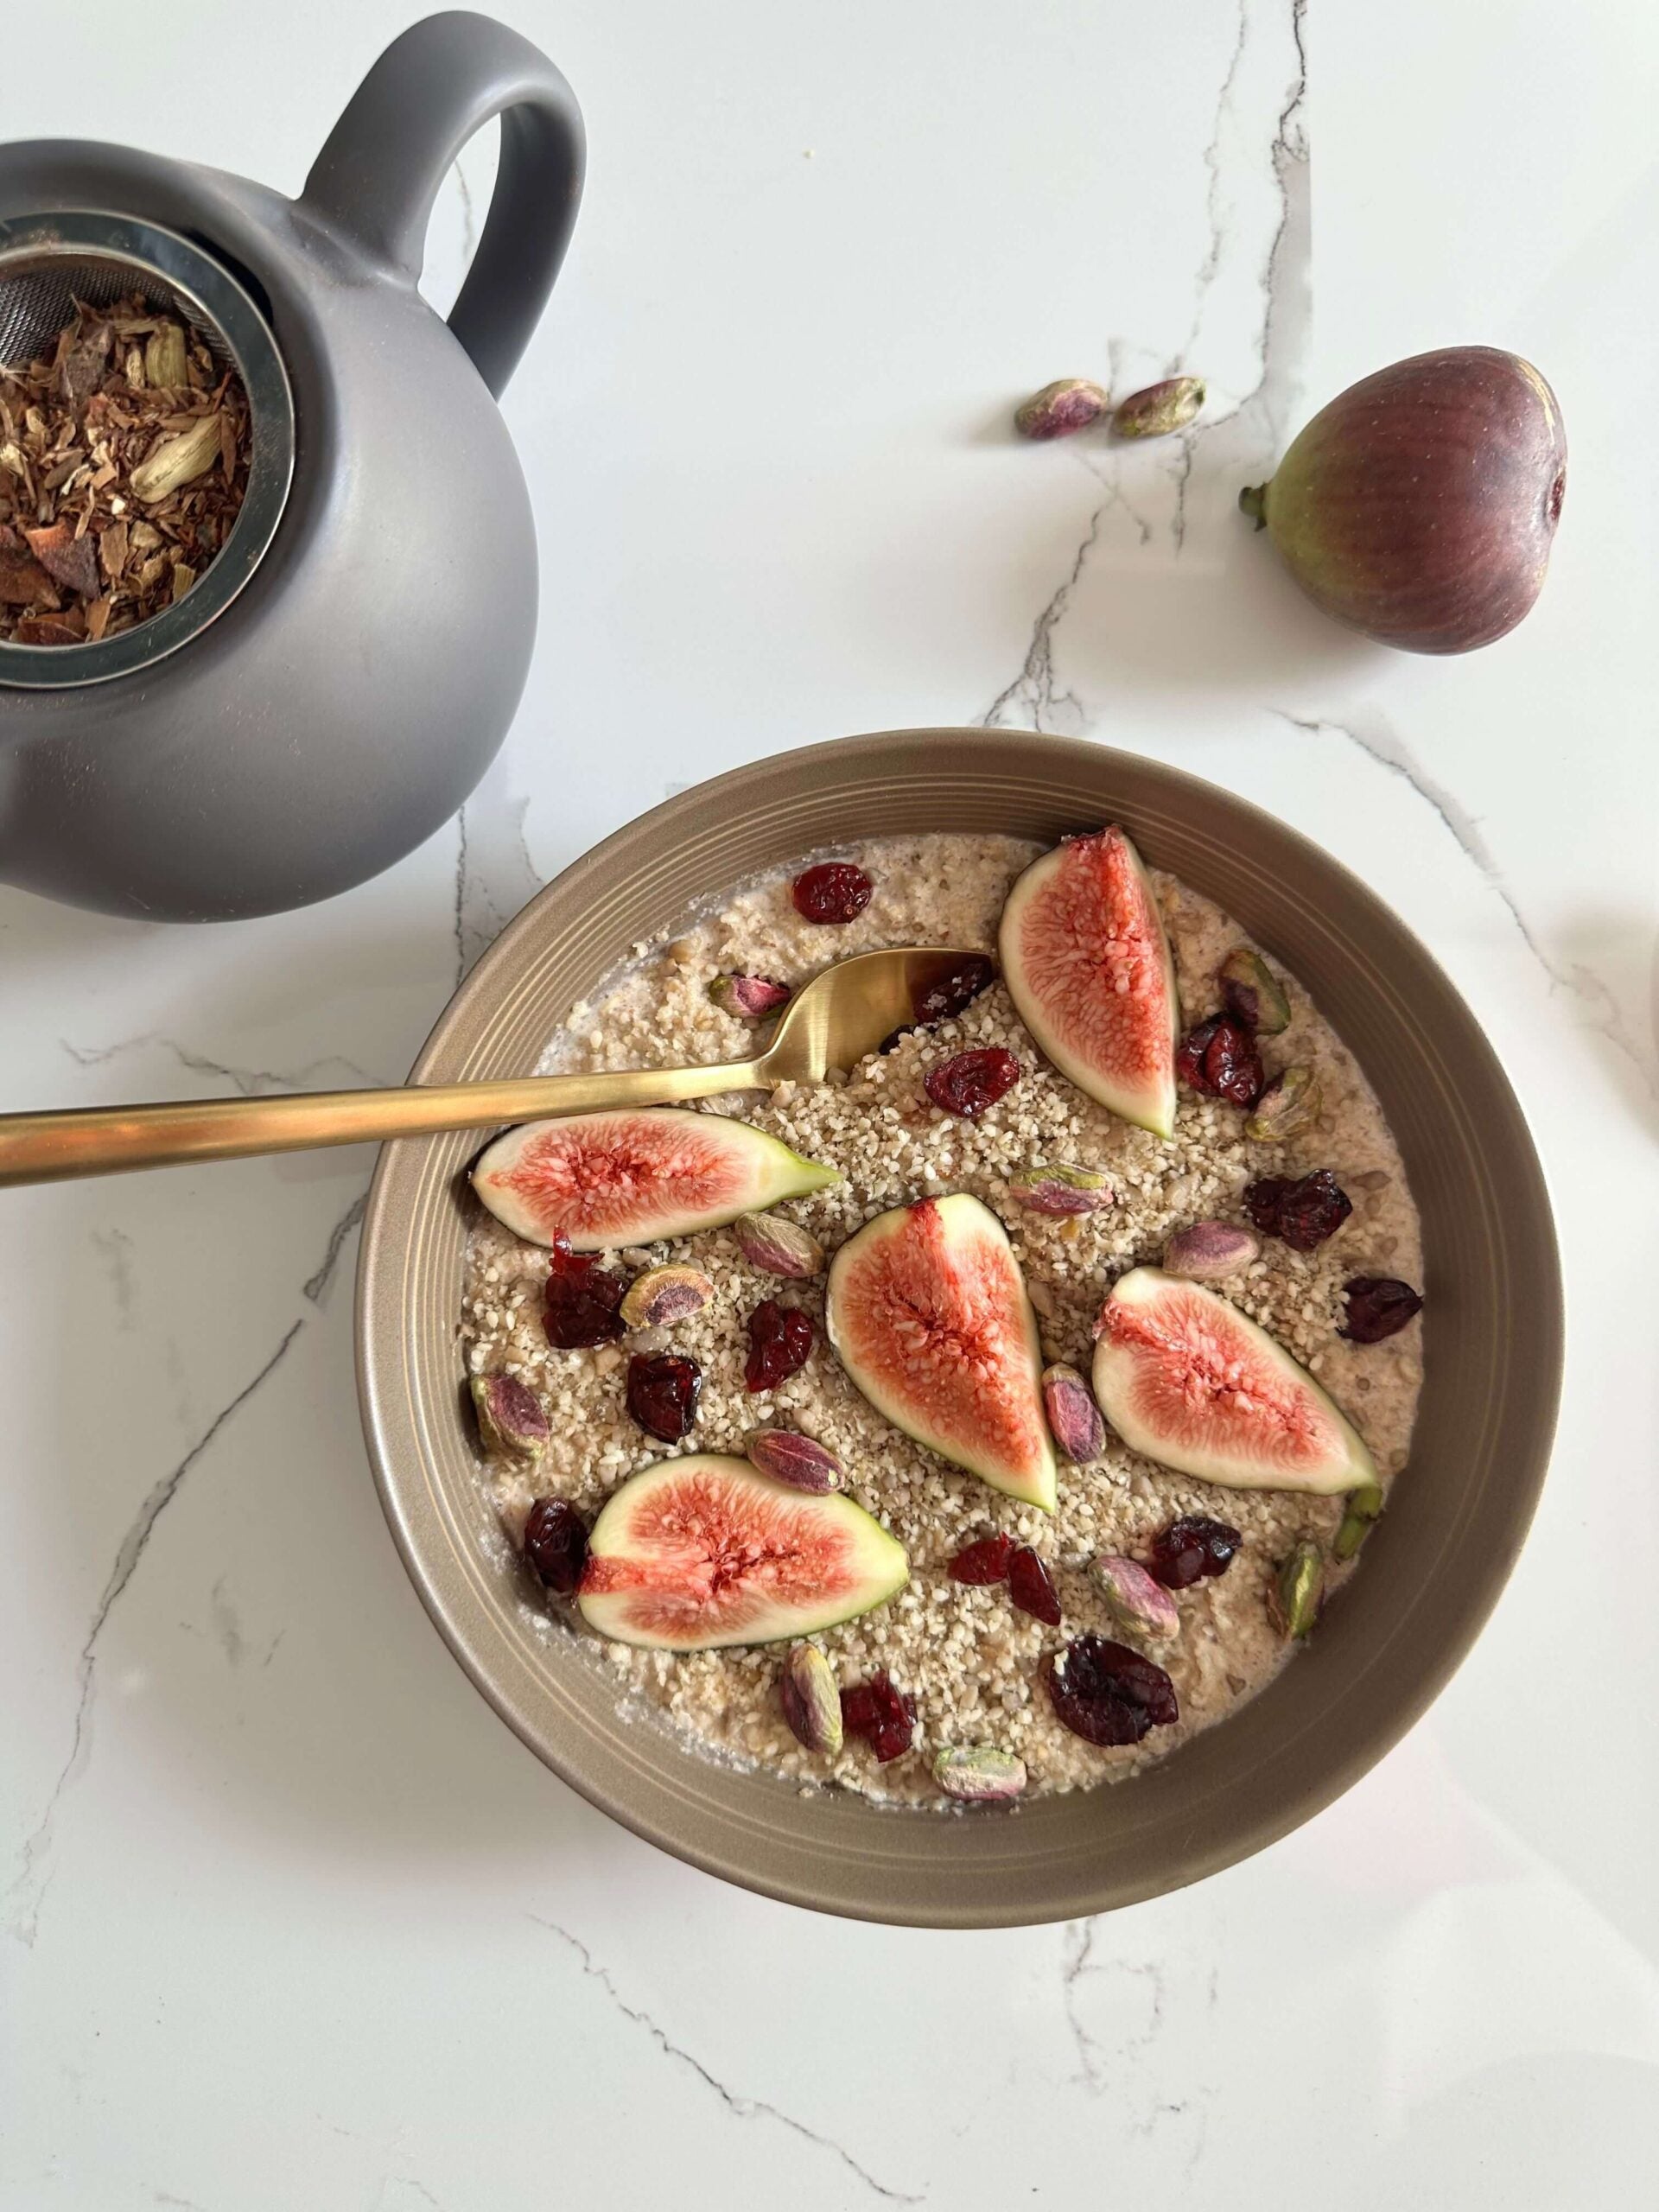 Seed + Porridge with Fig, Cranberry, and Pistachios with gold spoon and grey tea cup with tea leaves visable